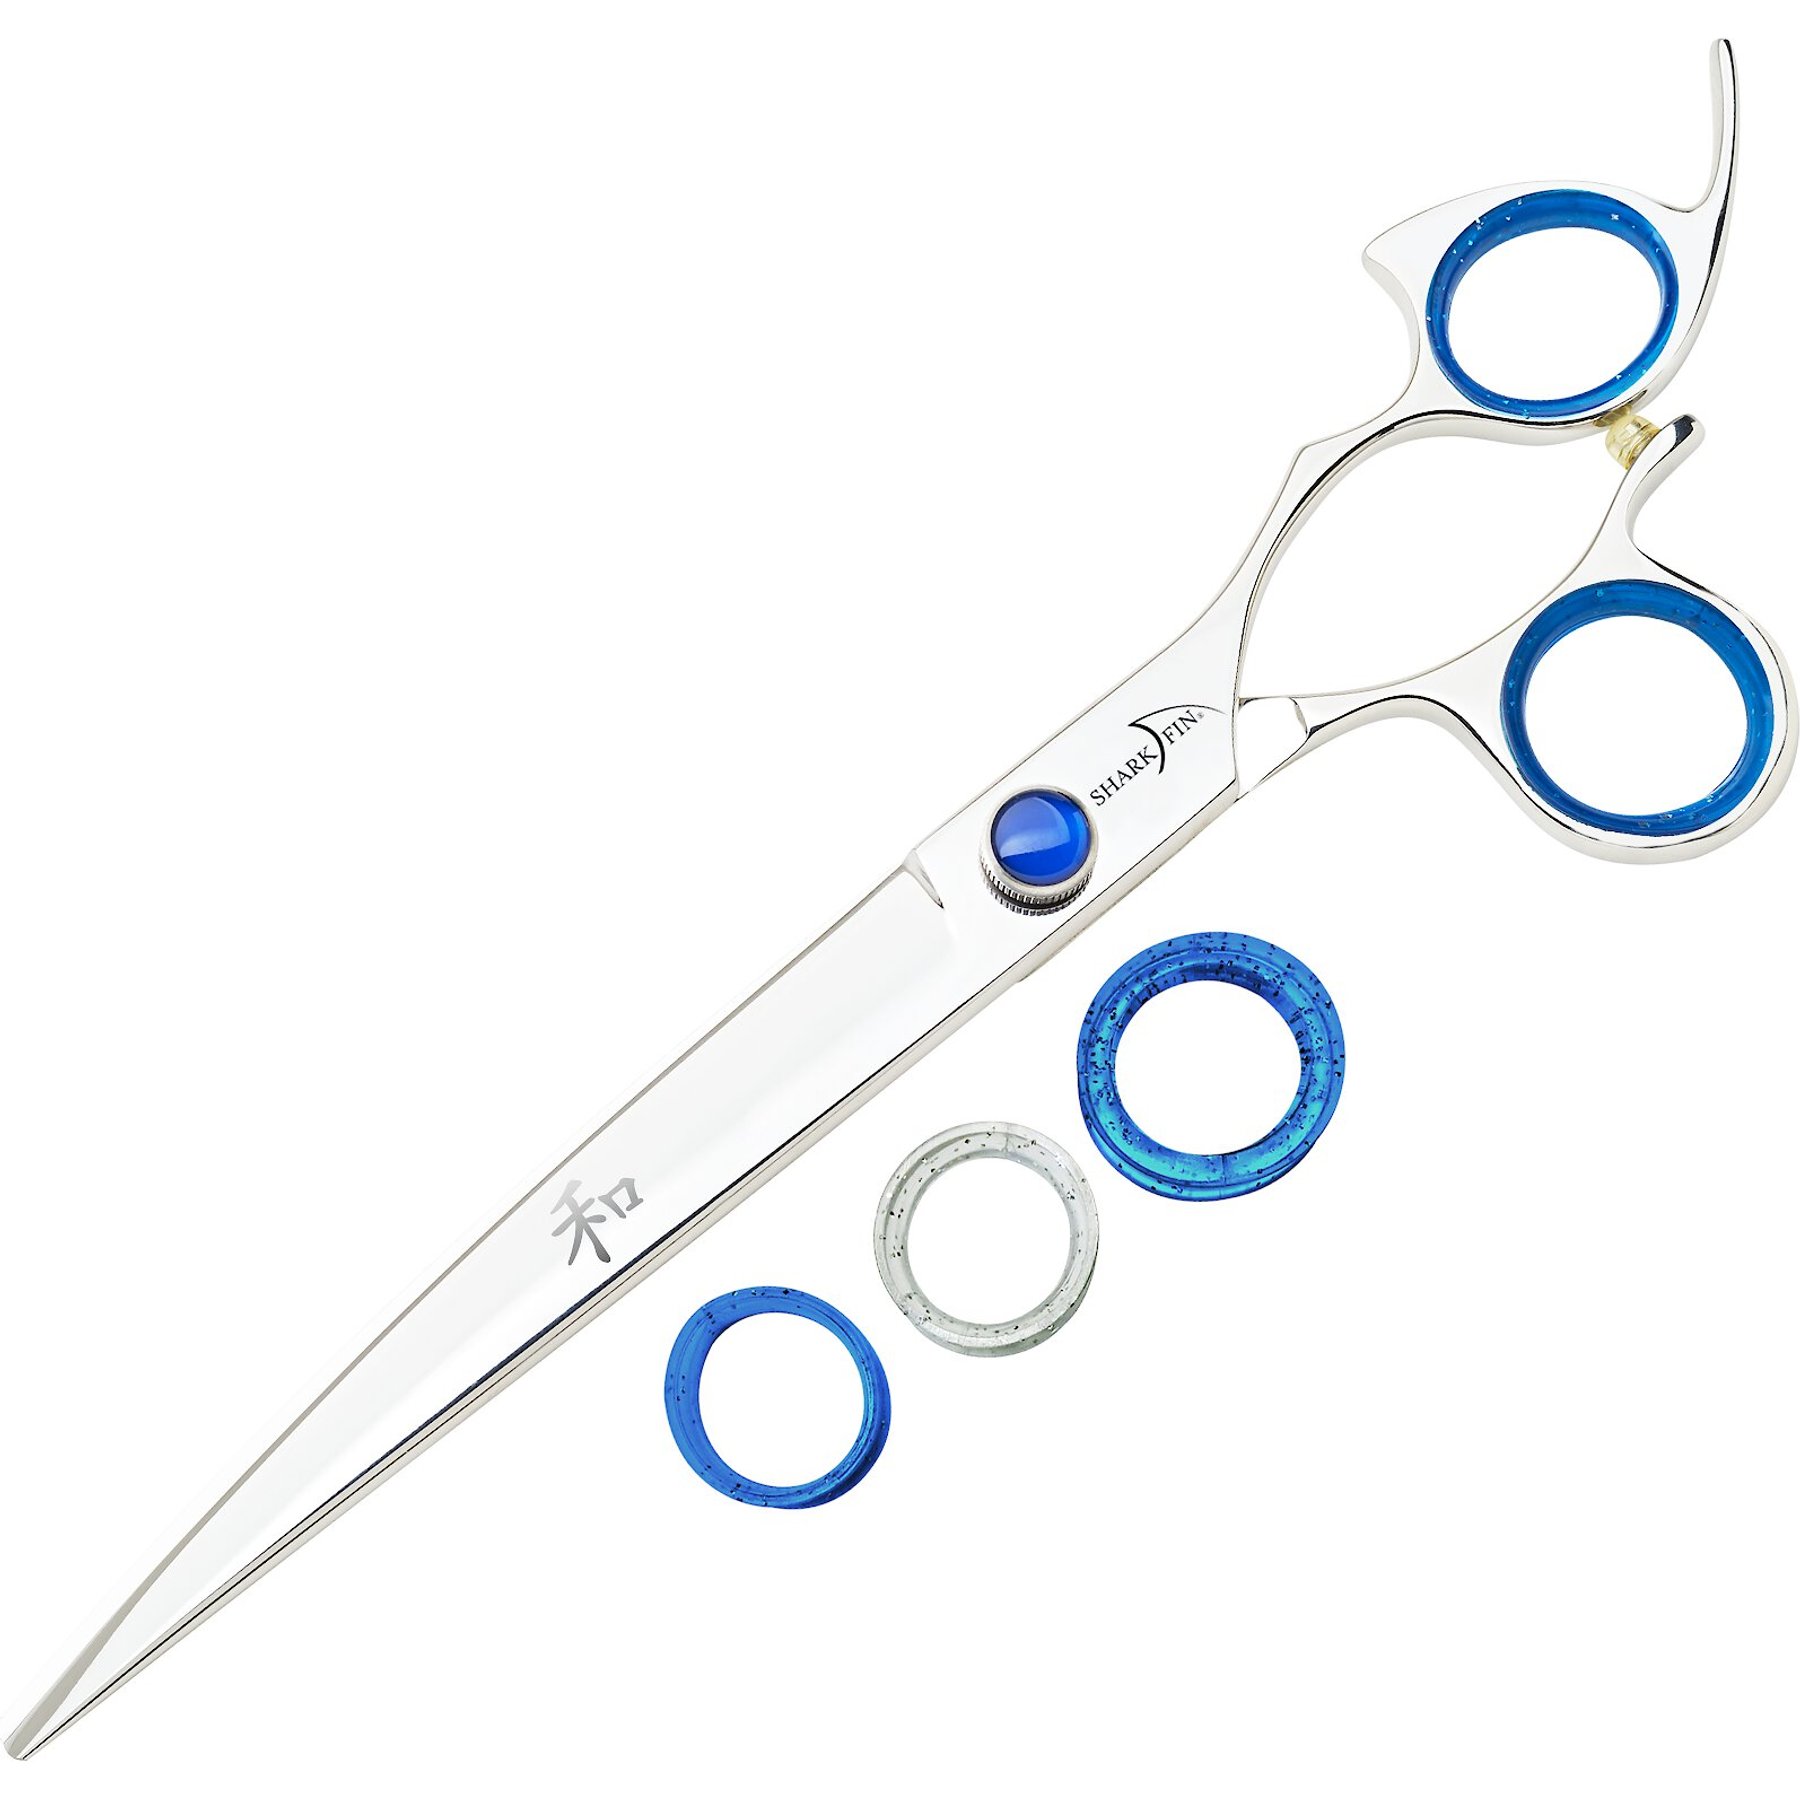 Kenchii Rose Curved Shear 9in